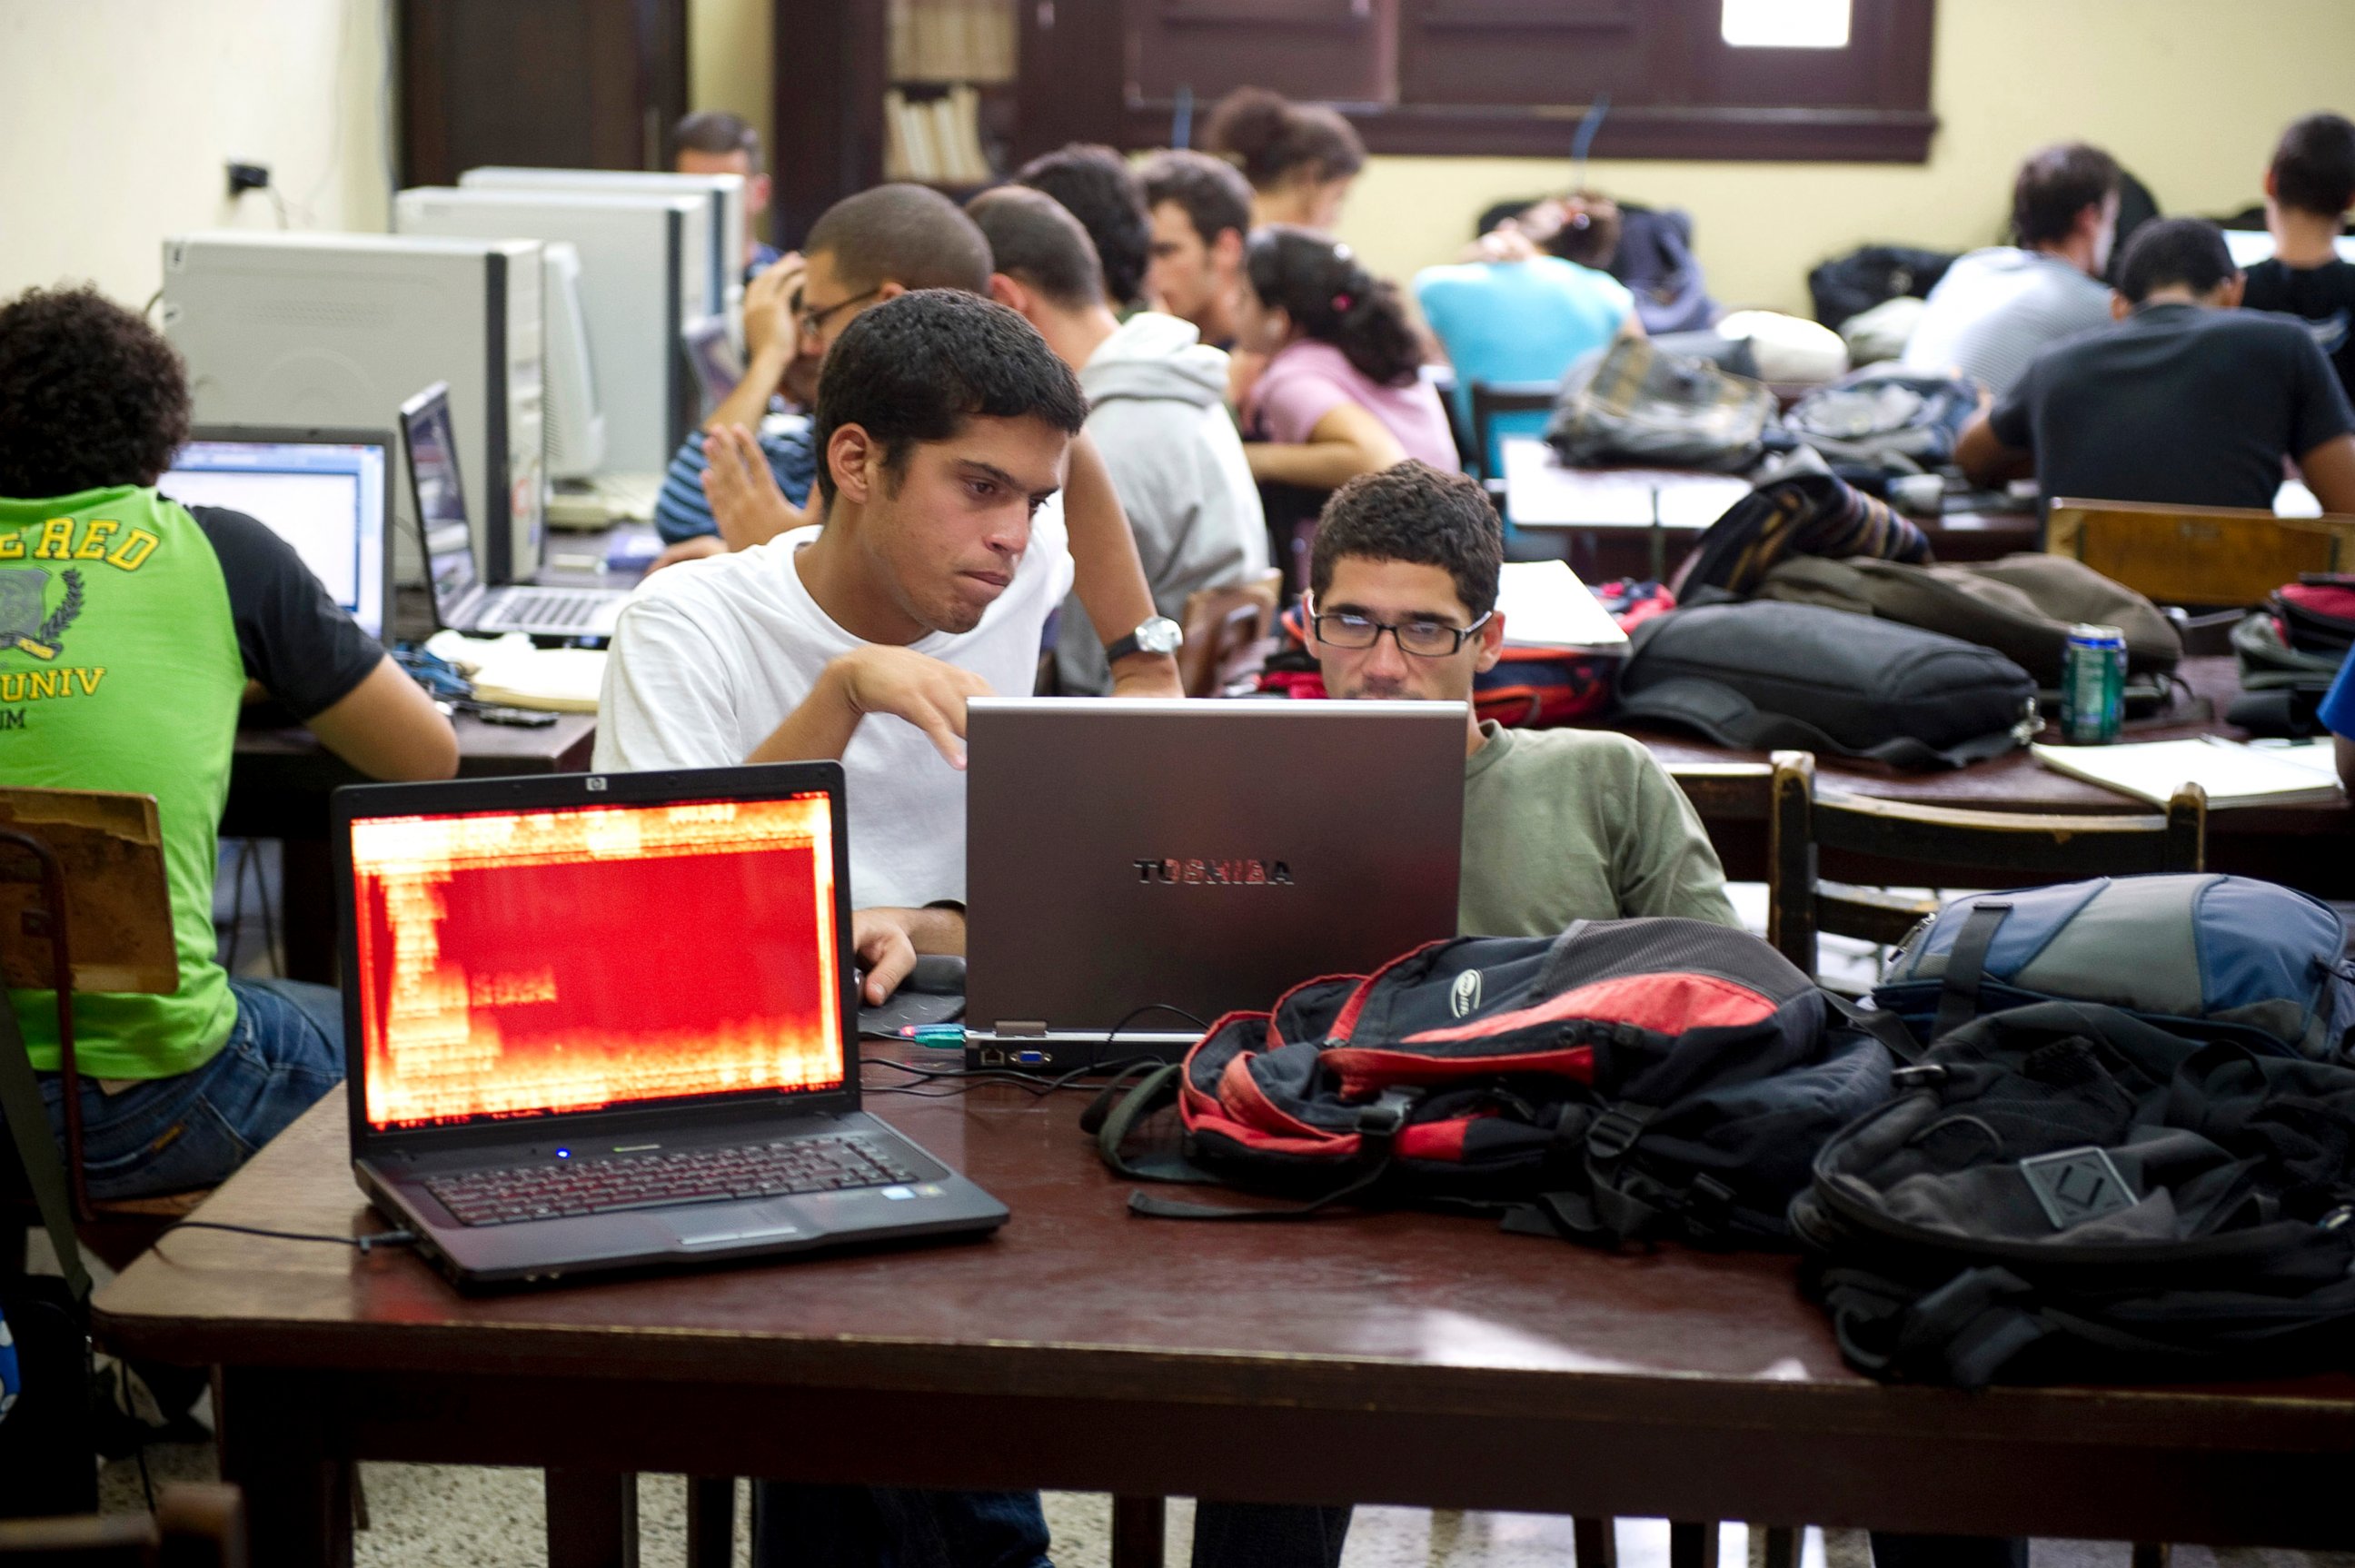 PHOTO: Students are seen  at the library of the School of Math and Computer Science at the University of Havana, Nov. 10, 2010.